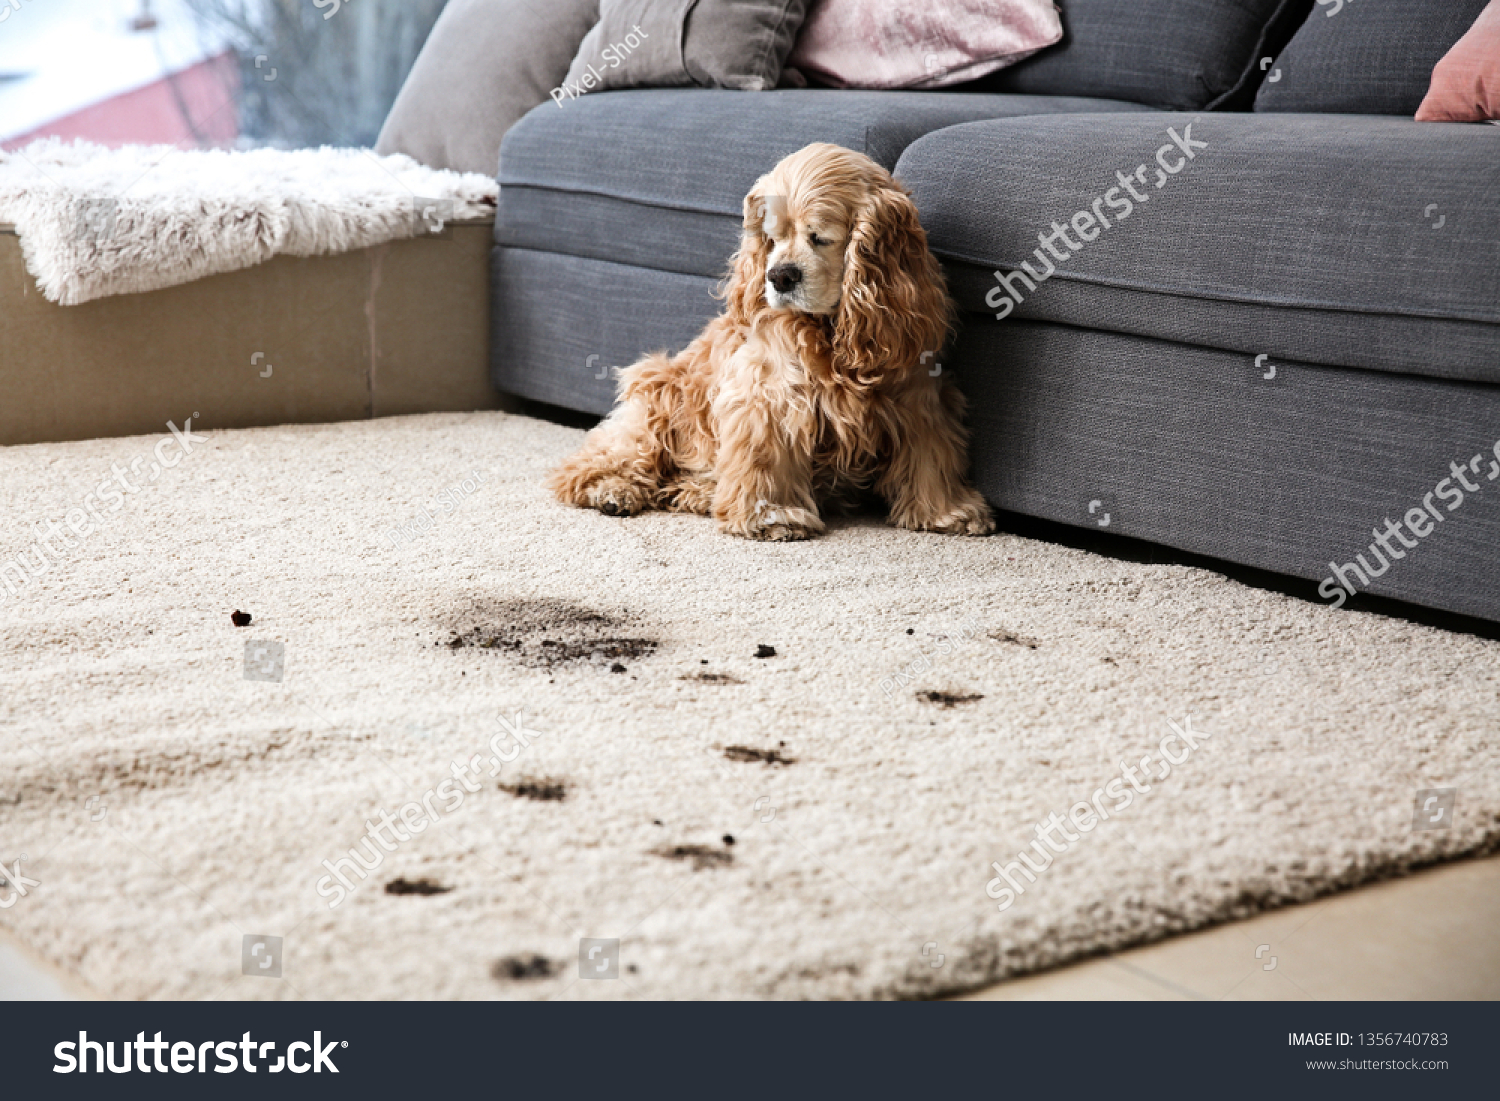 Funny dog and its dirty trails on carpet #1356740783